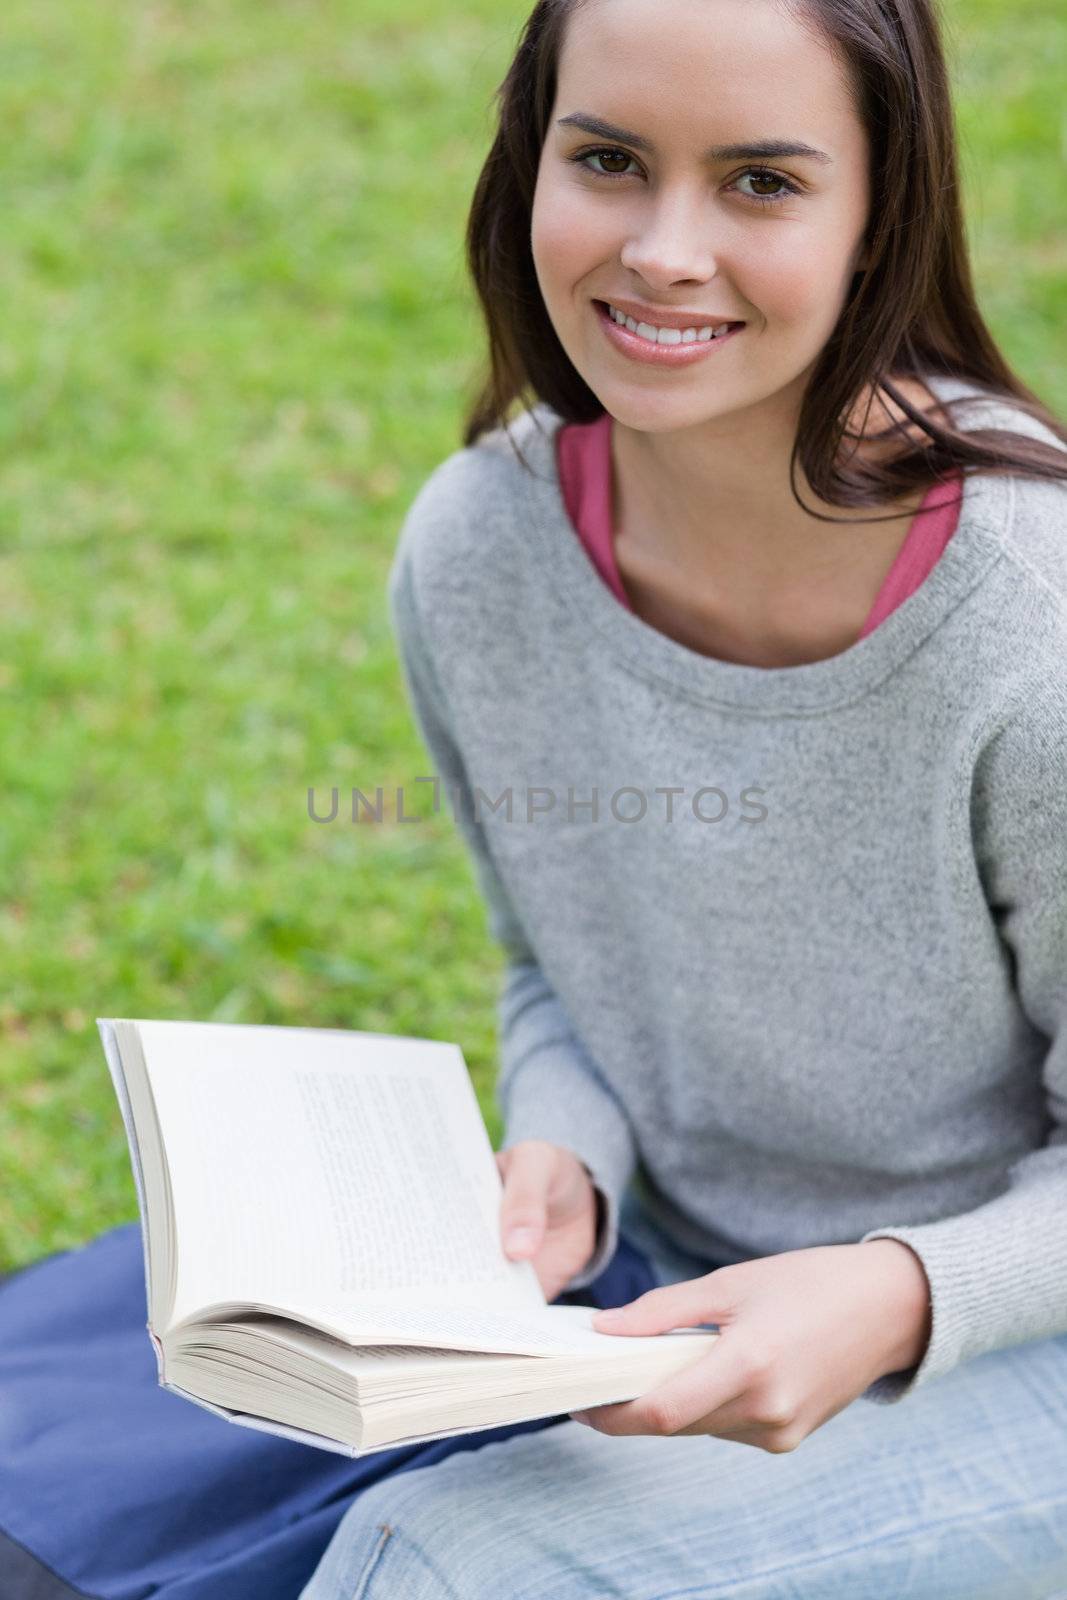 Young happy girl reading a book in a public garden while looking at the camera